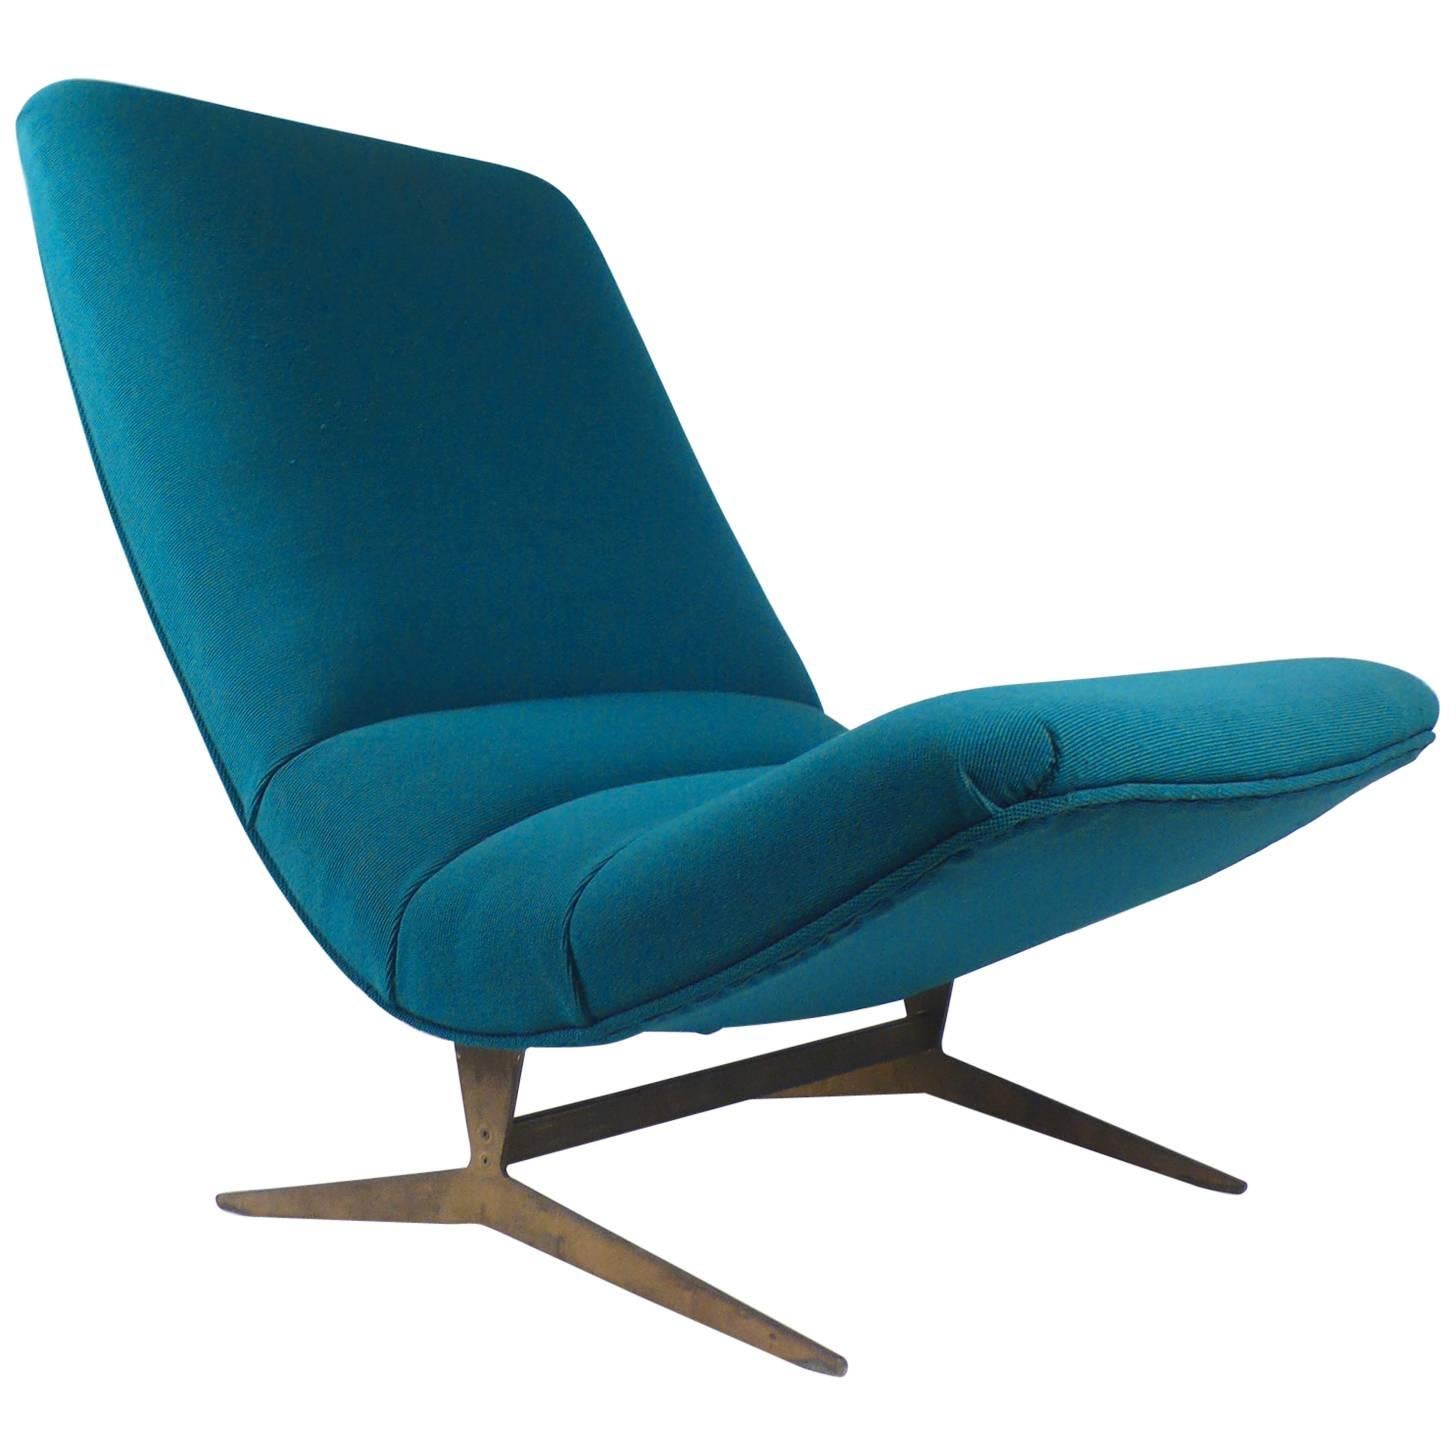 1960s Italian Scoop Lounge Chair with Patinated Bronze Base